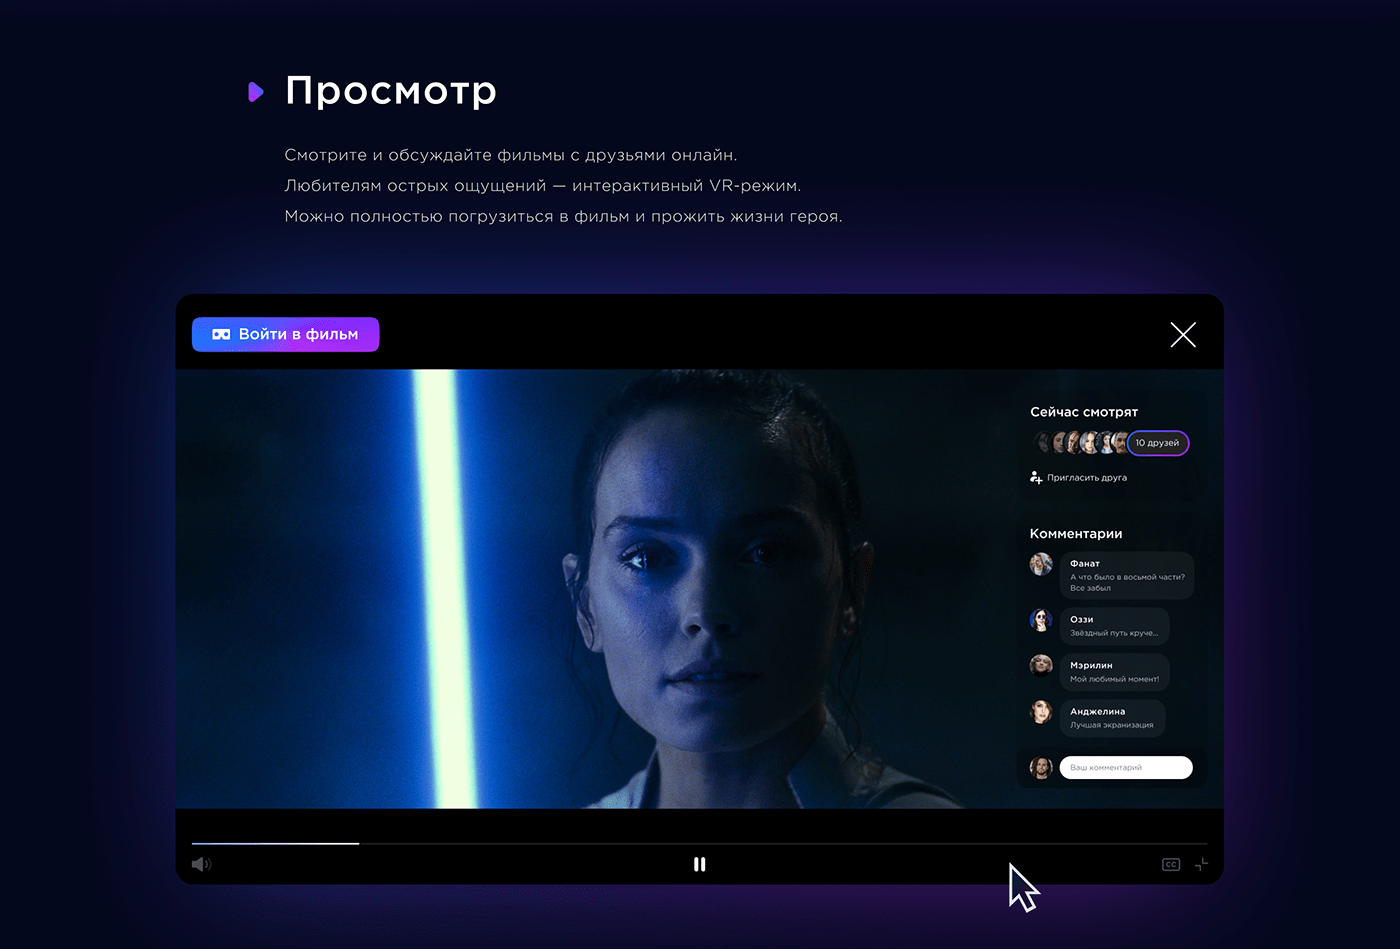 online cinema movie theater future star wars Web concept vr Voice assistant ai Recommendations